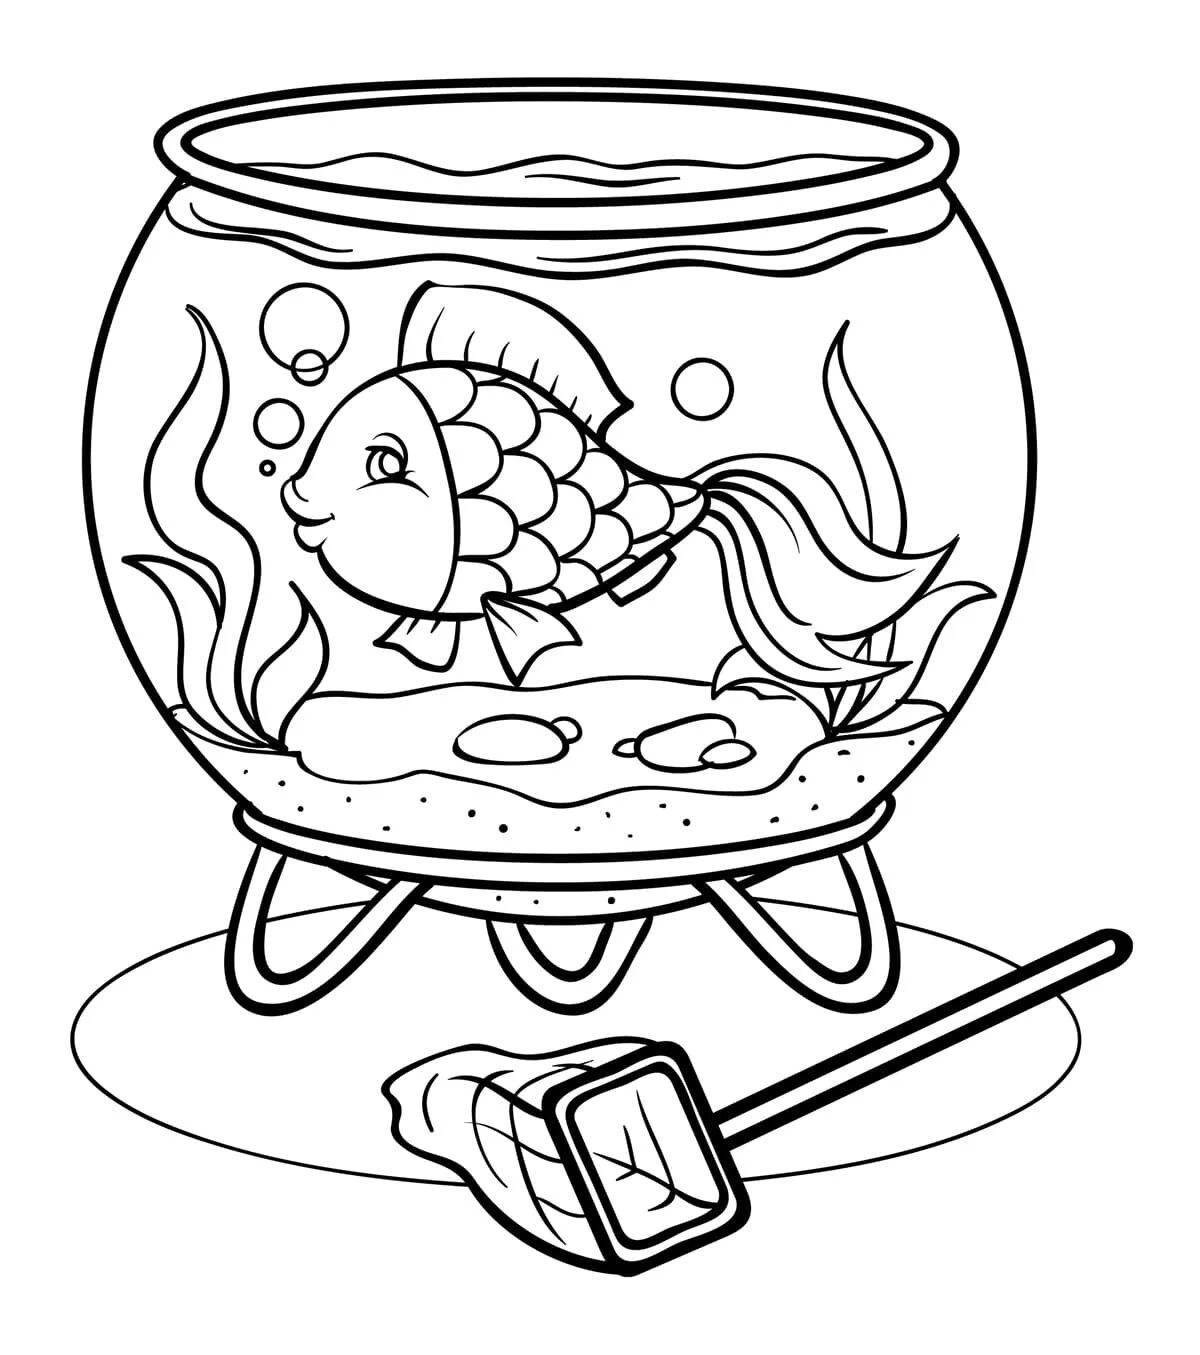 Exciting aqua coloring page